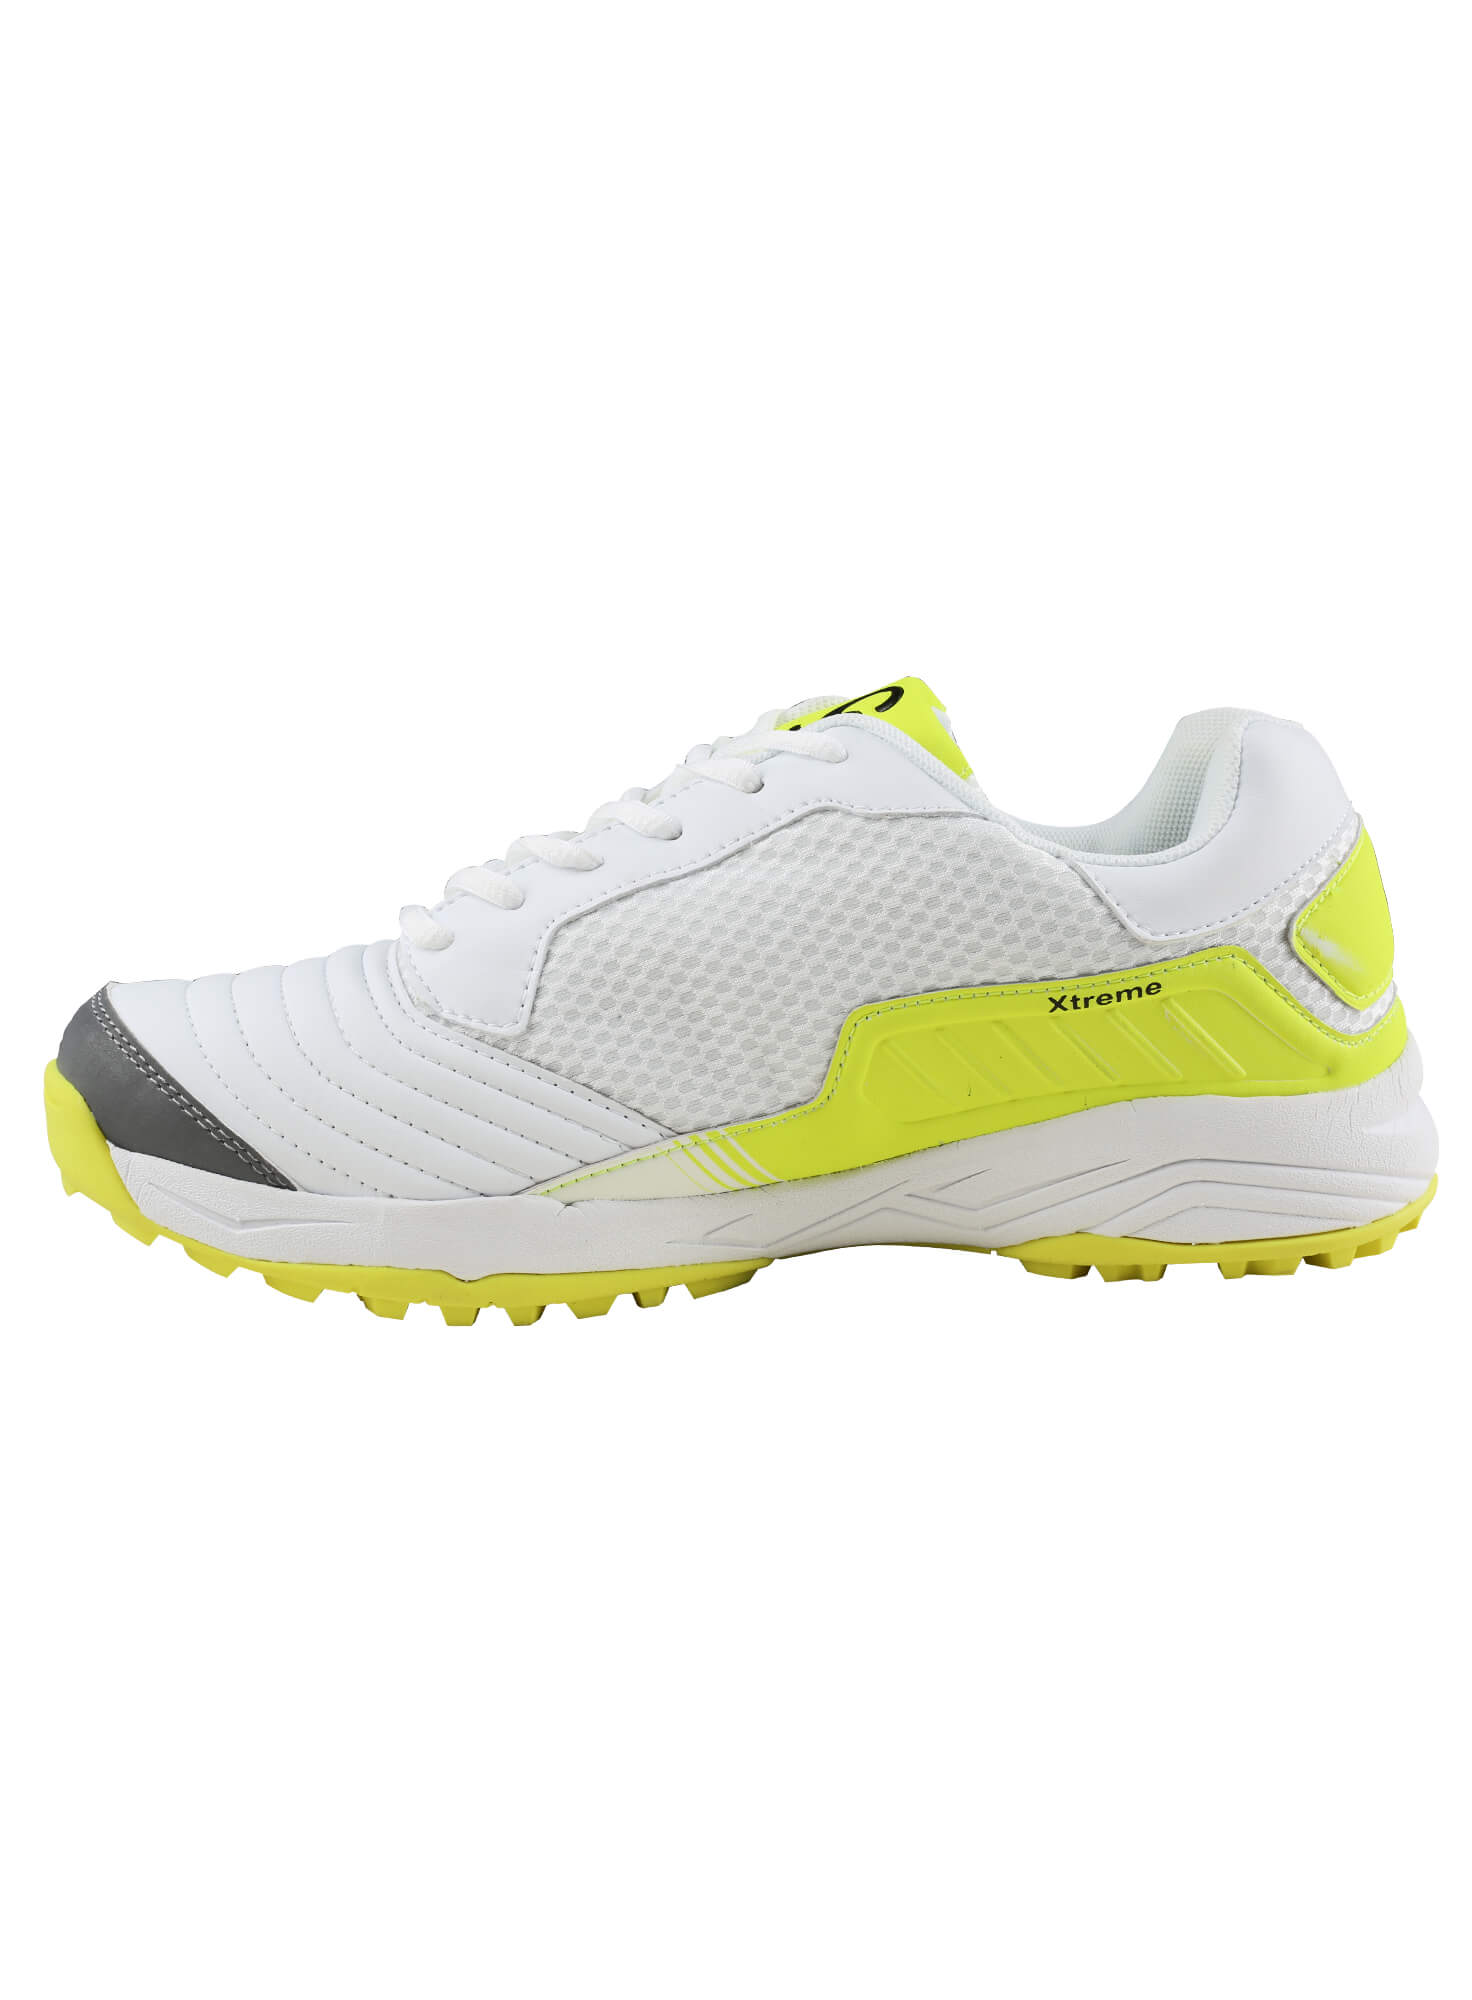 CA XTREME RUBBER CRICKET SHOES